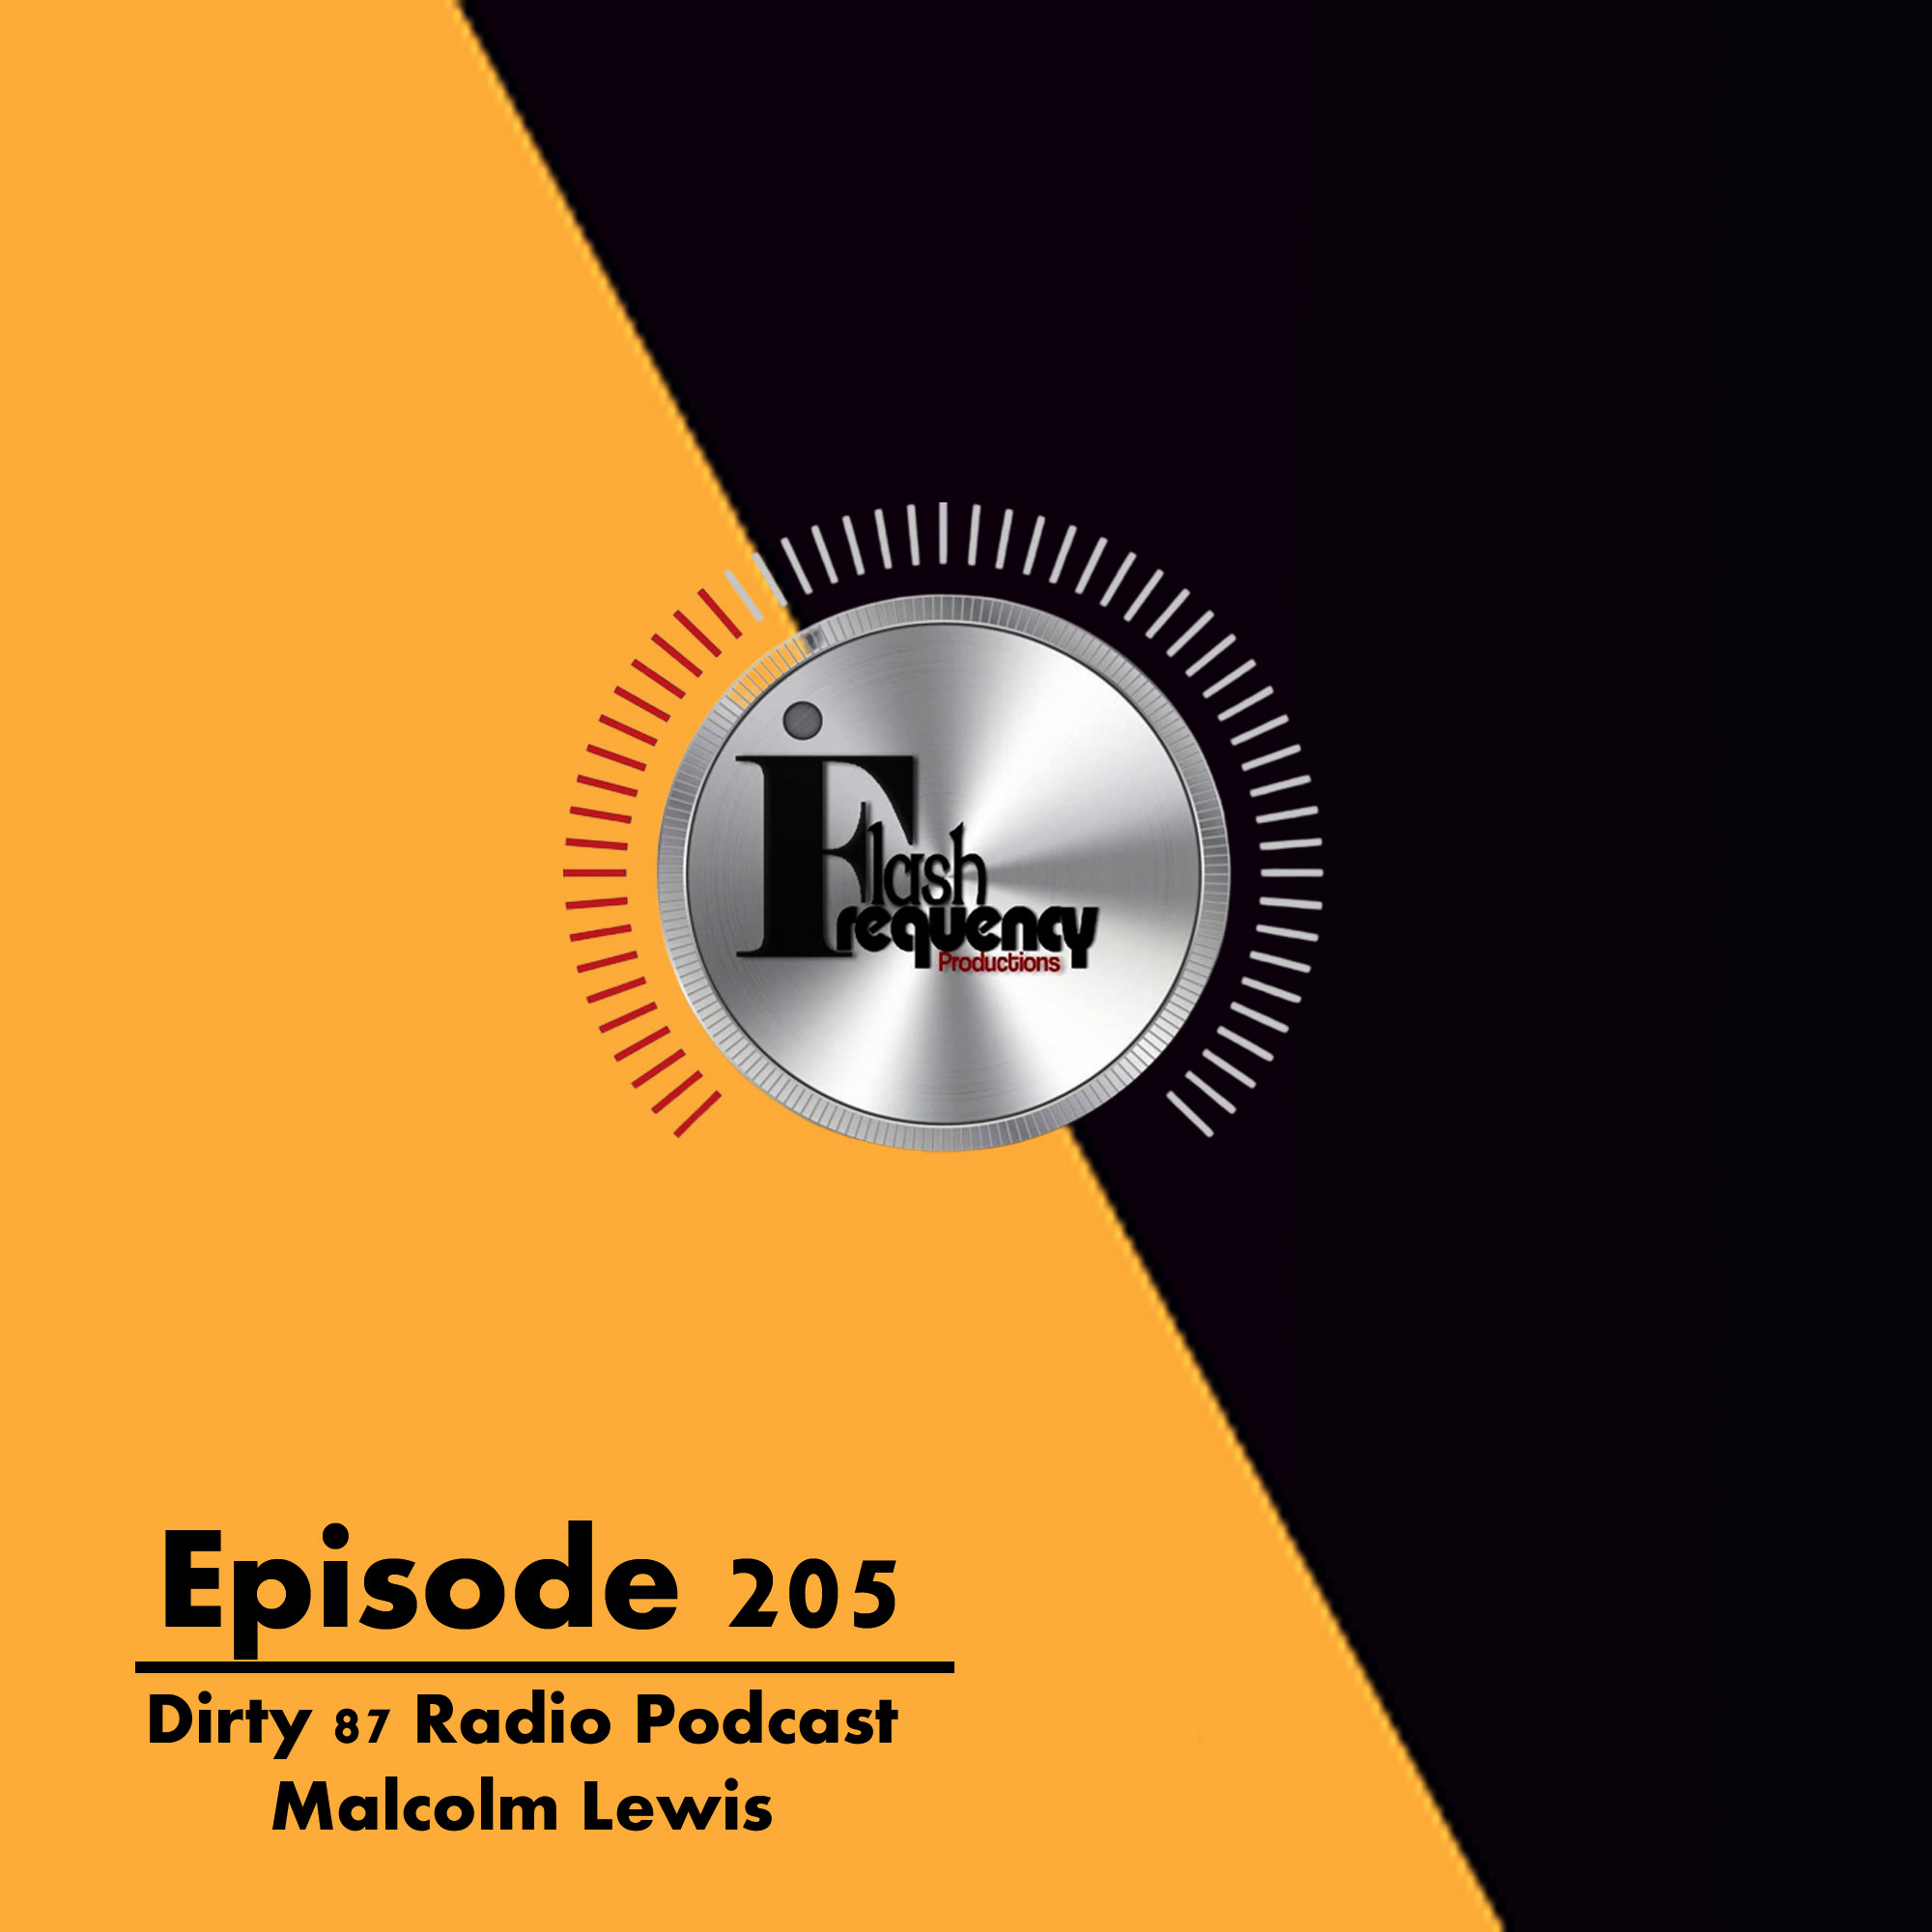 Malcolm Lewis - Dirty 87 Podcast Episode 205